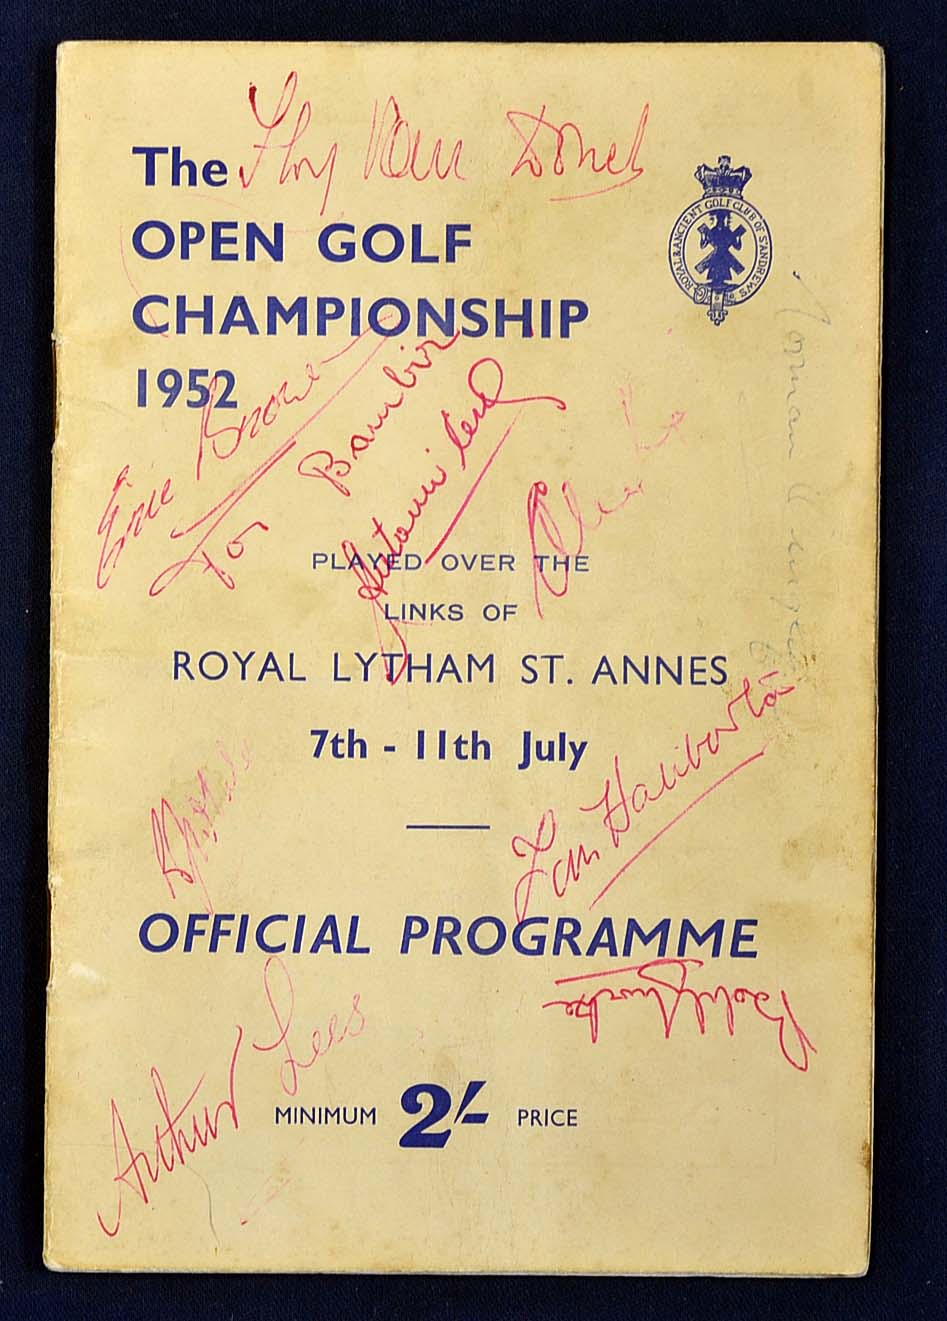 Rare 1952 Open Golf Championship signed programme - signed by the winner Bobby Locke and others to